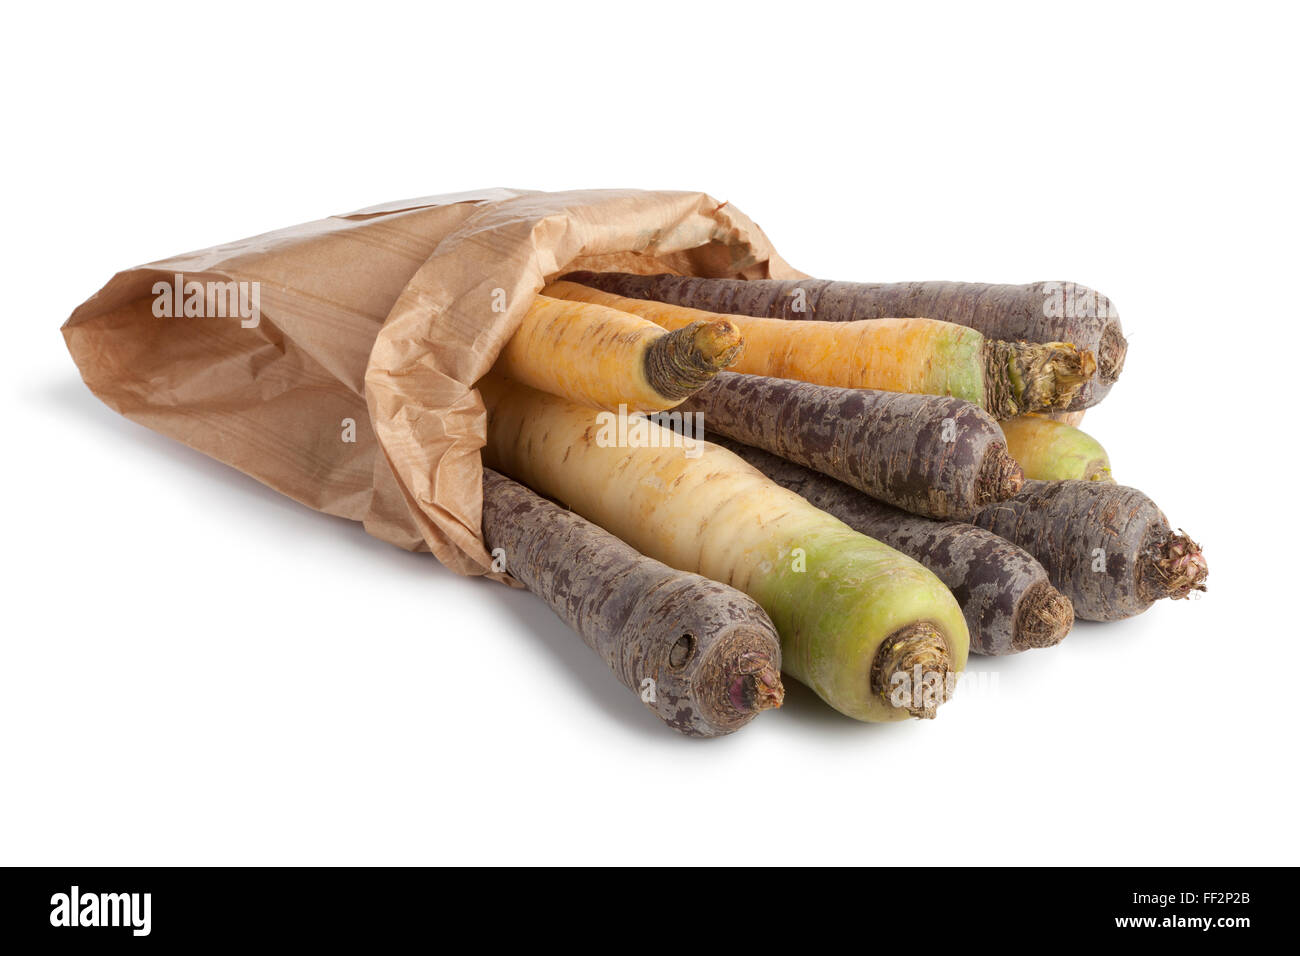 Black, white and yellow fresh carrots in a paper bag on white background Stock Photo